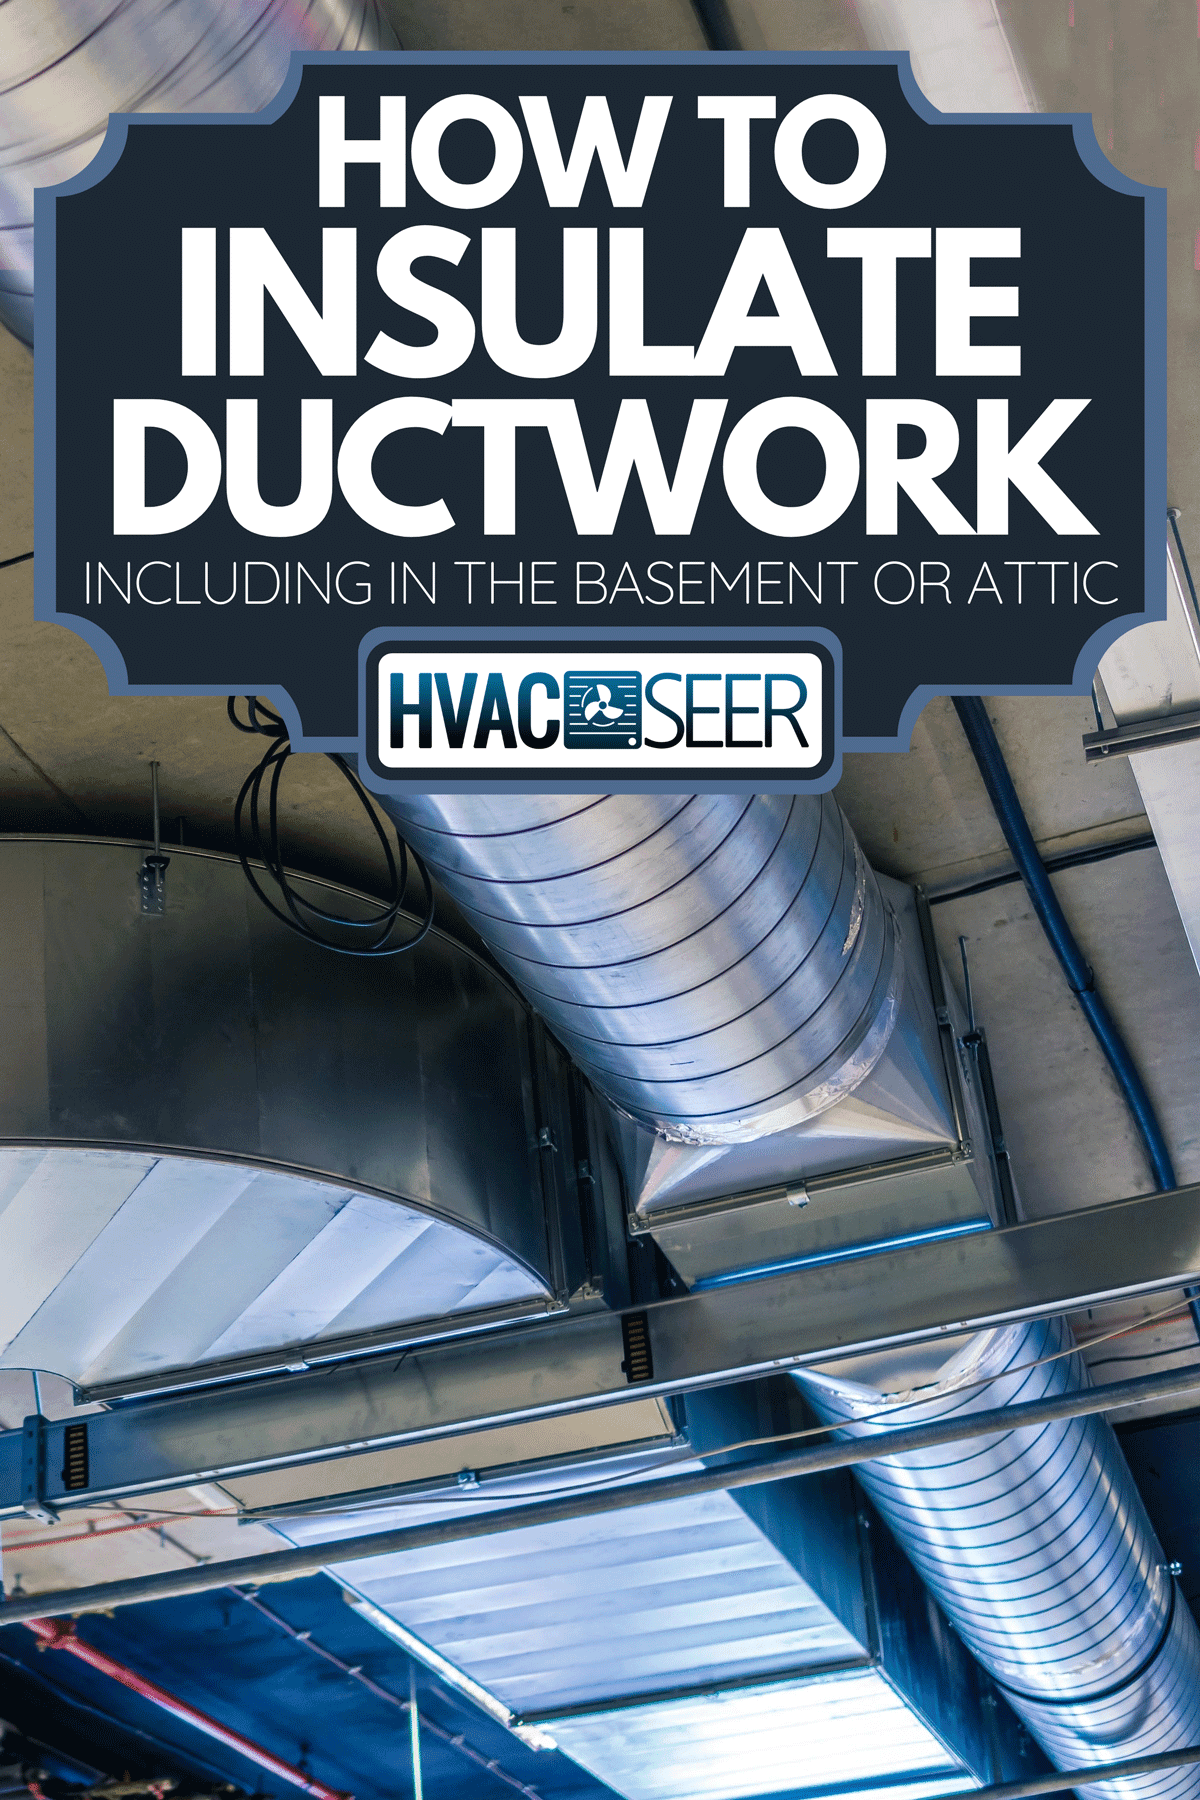 A pipes of HVAC system for heating ventilation and air conditioning, How To Insulate Ductwork [Inc. In The Basement Or Attic]